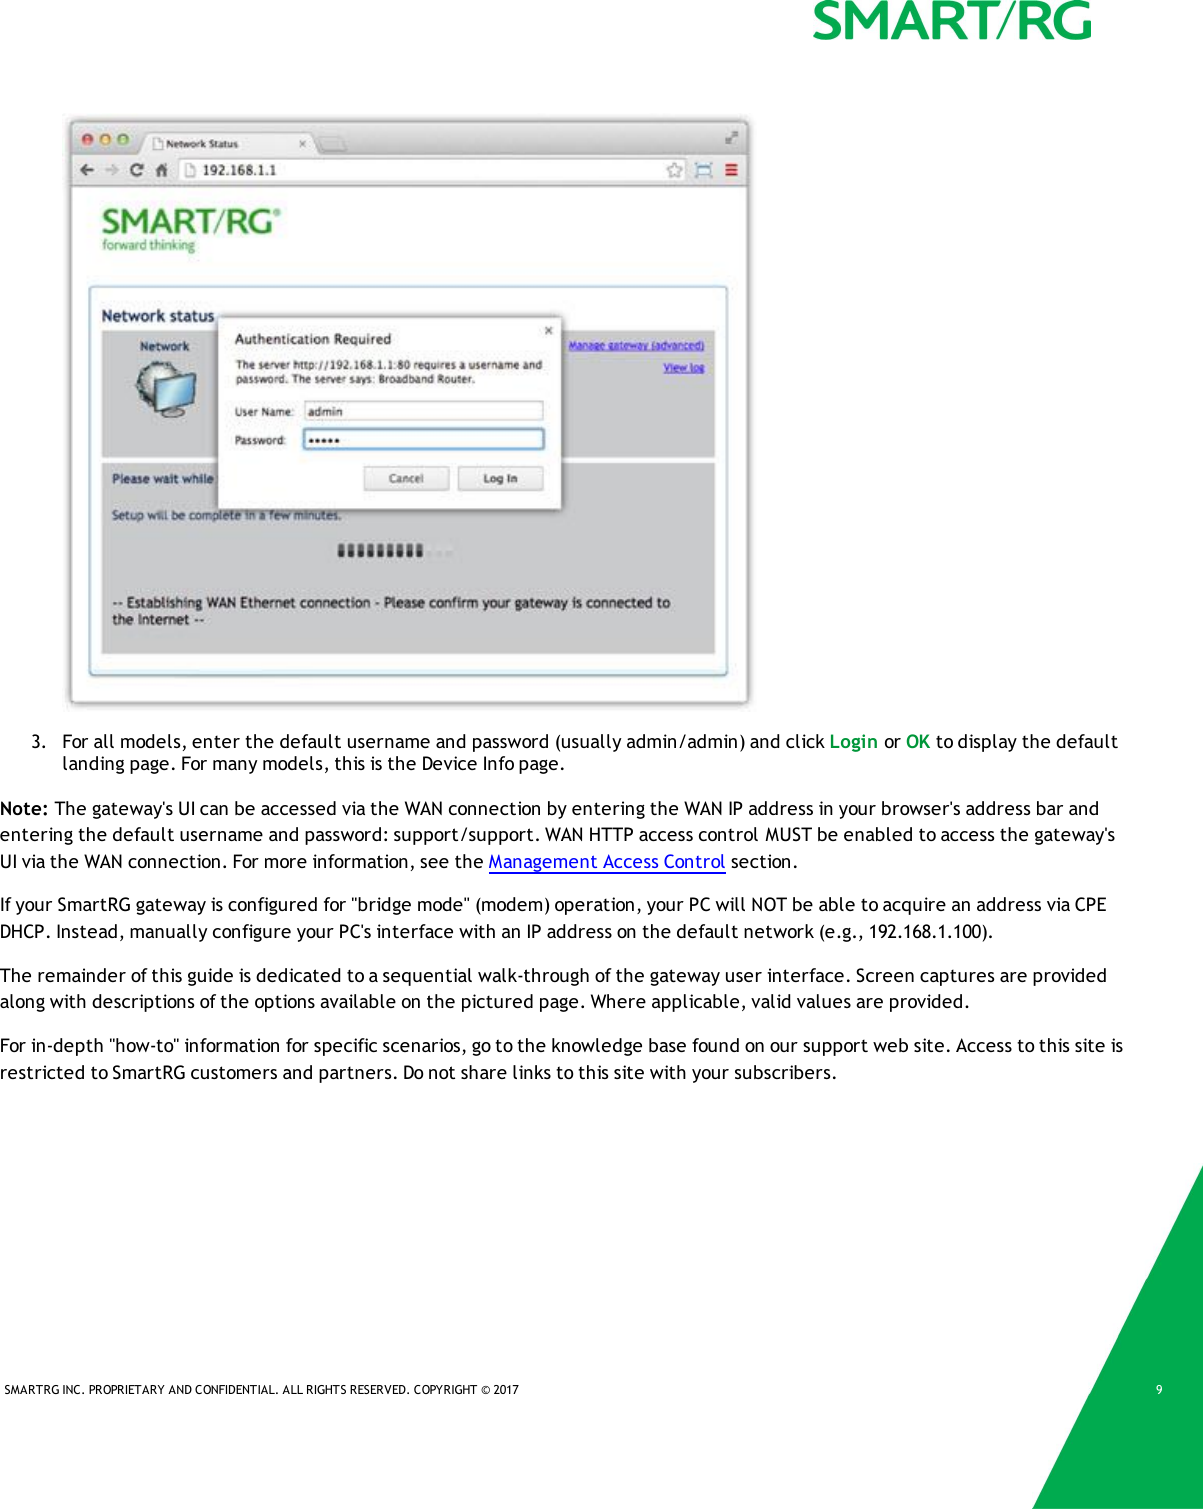 SMARTRG INC. PROPRIETARY AND CONFIDENTIAL. ALL RIGHTS RESERVED. COPYRIGHT © 2017 93. For all models, enter the default username and password (usually admin/admin) and click Login or OK to display the defaultlanding page. For many models, this is the Device Info page.Note: The gateway&apos;s UI can be accessed via the WAN connection by entering the WAN IP address in your browser&apos;s address bar andentering the default username and password: support/support. WAN HTTP access control MUST be enabled to access the gateway&apos;sUI via the WAN connection. For more information, see the Management Access Control section.If your SmartRG gateway is configured for &quot;bridge mode&quot; (modem) operation, your PC will NOT be able to acquire an address via CPEDHCP. Instead, manually configure your PC&apos;s interface with an IP address on the default network (e.g., 192.168.1.100).The remainder of this guide is dedicated to a sequential walk-through of the gateway user interface. Screen captures are providedalong with descriptions of the options available on the pictured page. Where applicable, valid values are provided.For in-depth &quot;how-to&quot; information for specific scenarios, go to the knowledge base found on our support web site. Access to this site isrestricted to SmartRG customers and partners. Do not share links to this site with your subscribers.